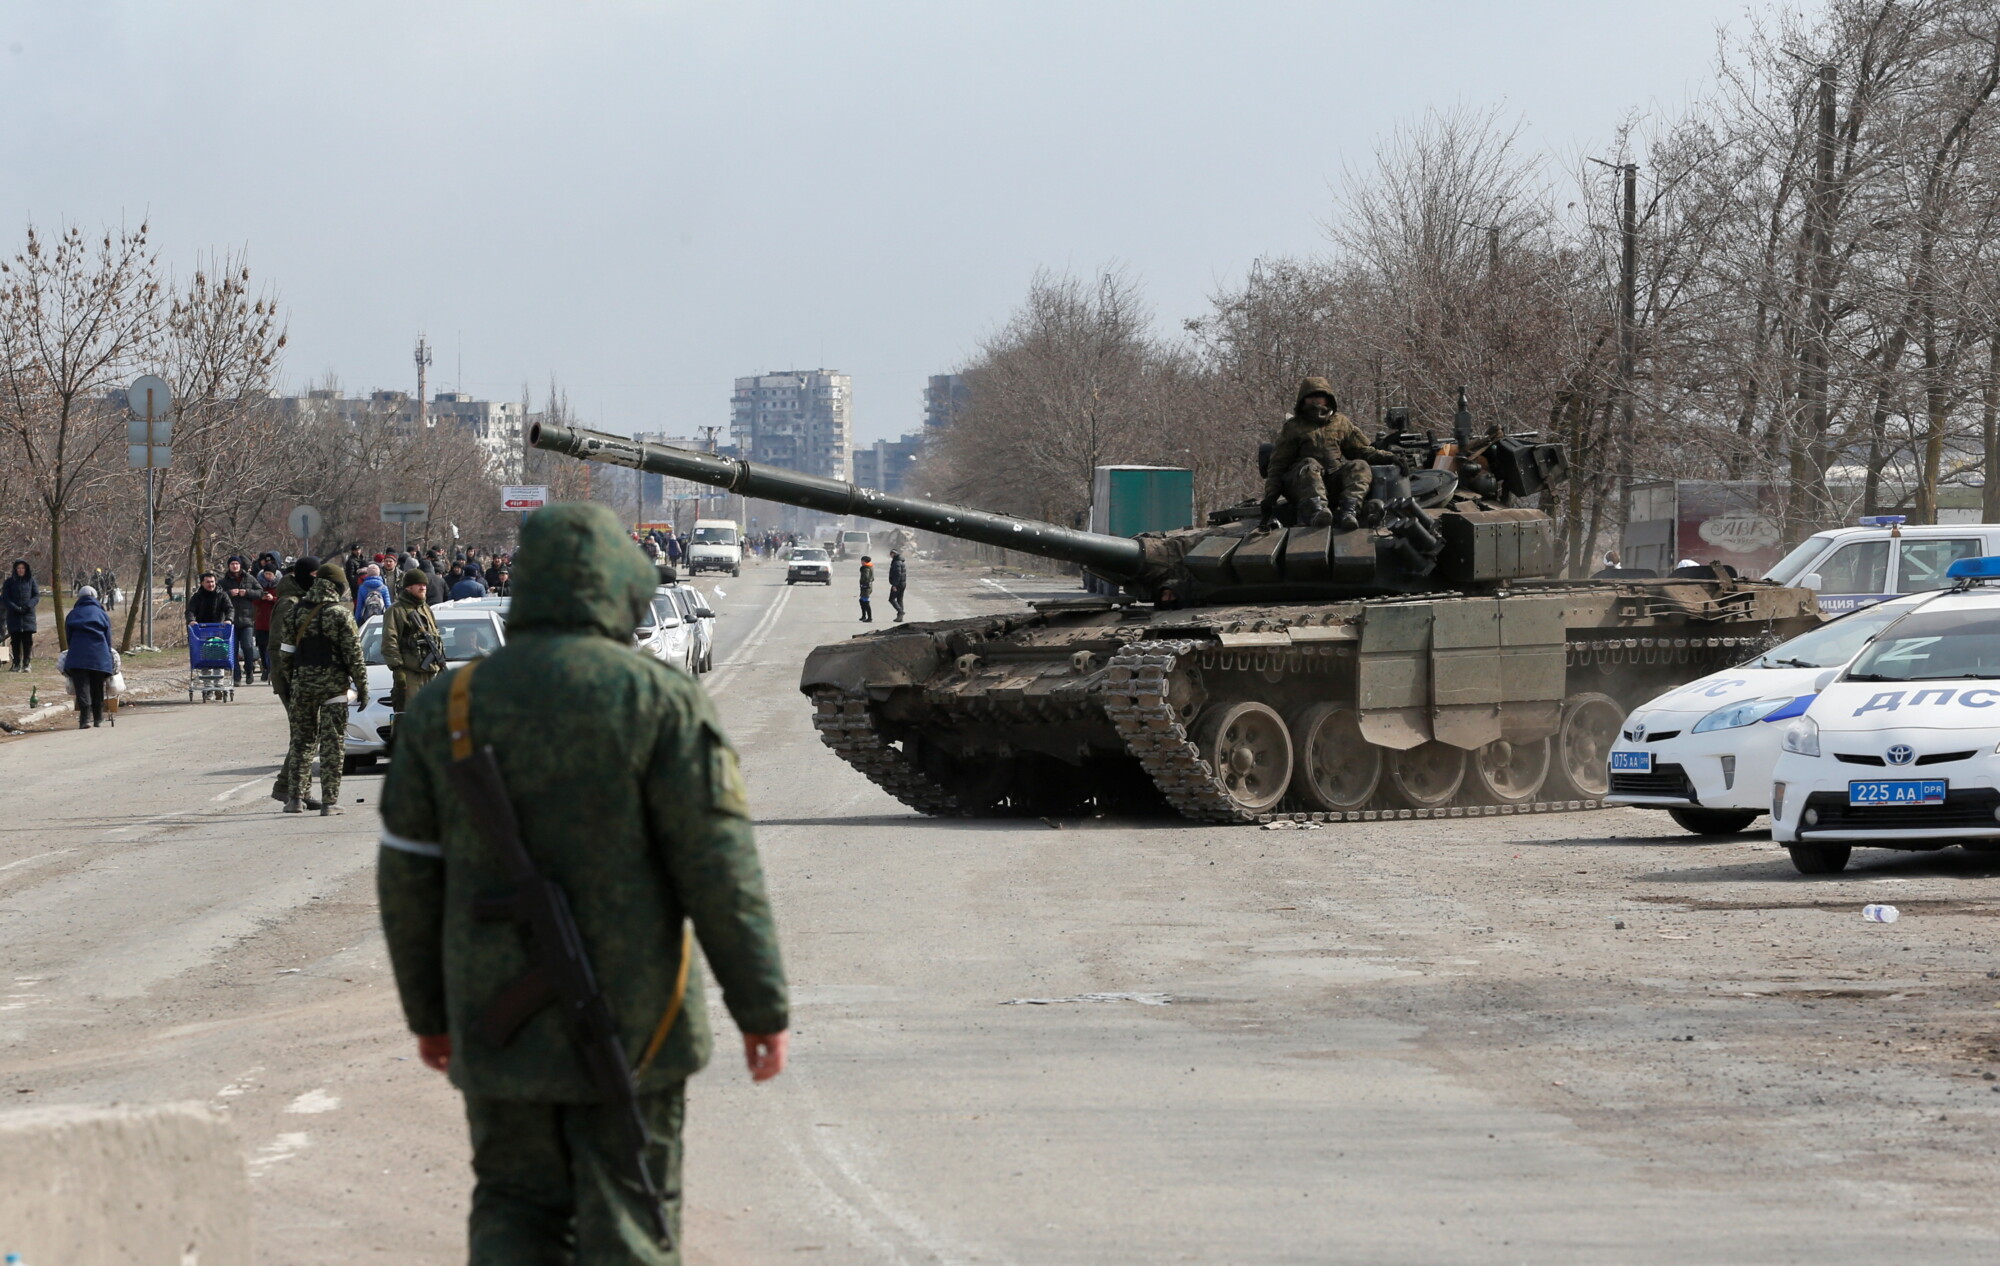 Ukraine Refuses Russia’s Request to ‘Lay Down Arms’ and Surrender Mariupol by Monday Deadline